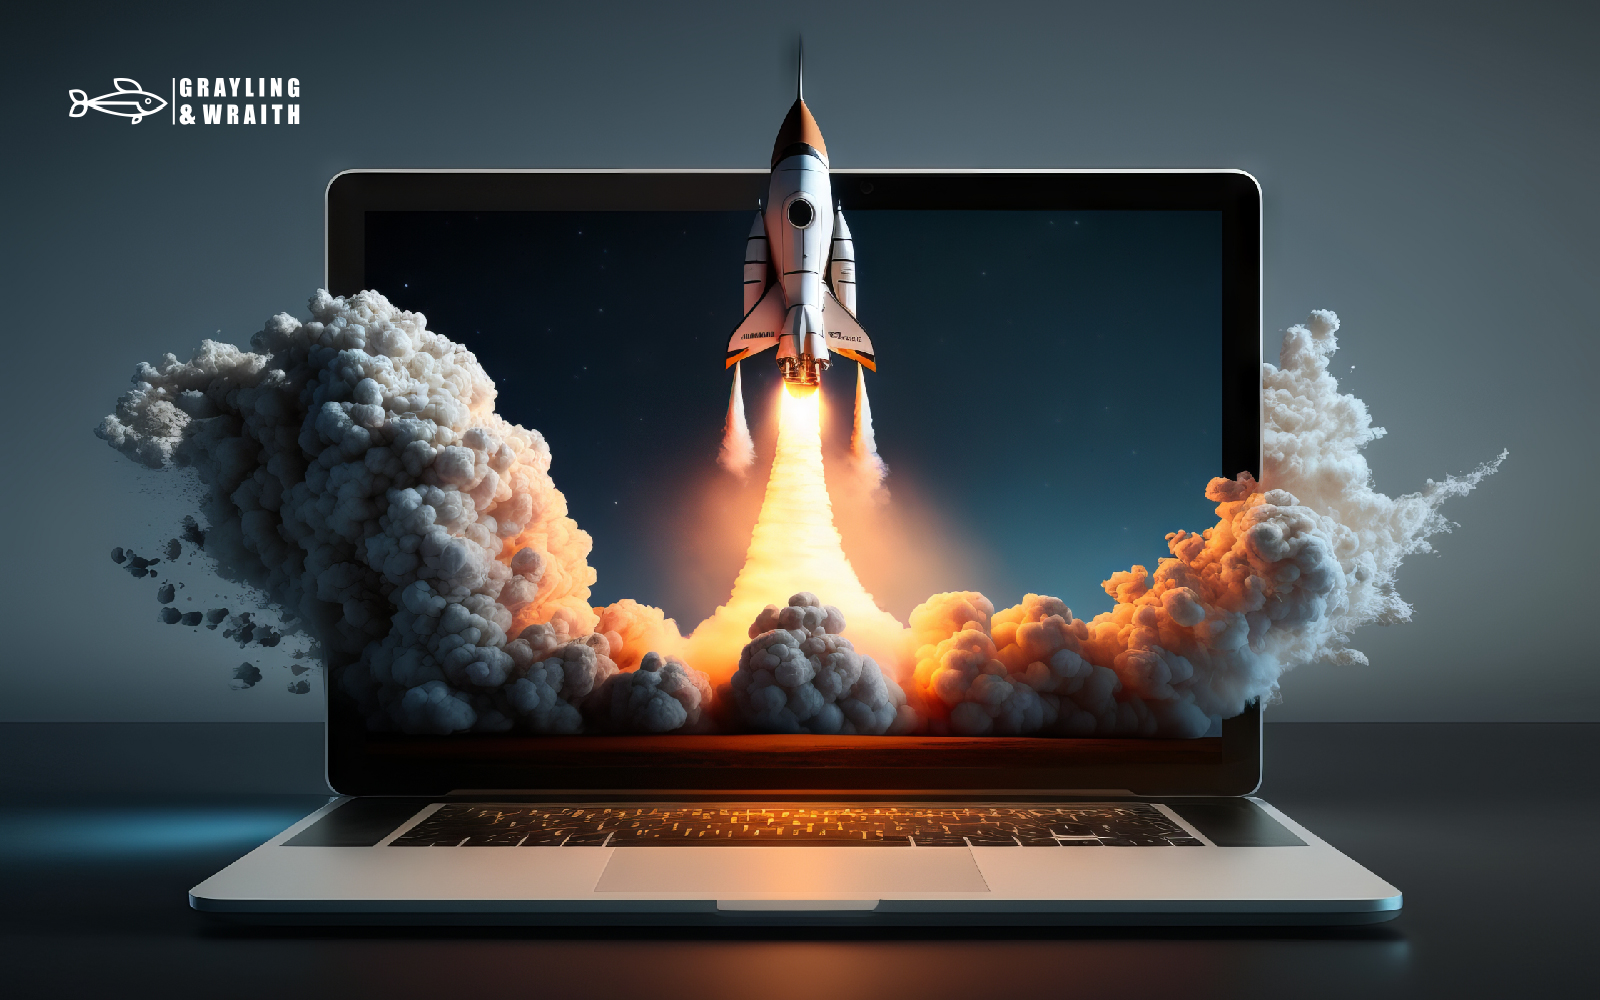 A space shuttle launching from a laptop screen, symbolizing the launch of innovative ideas with AI art tools.